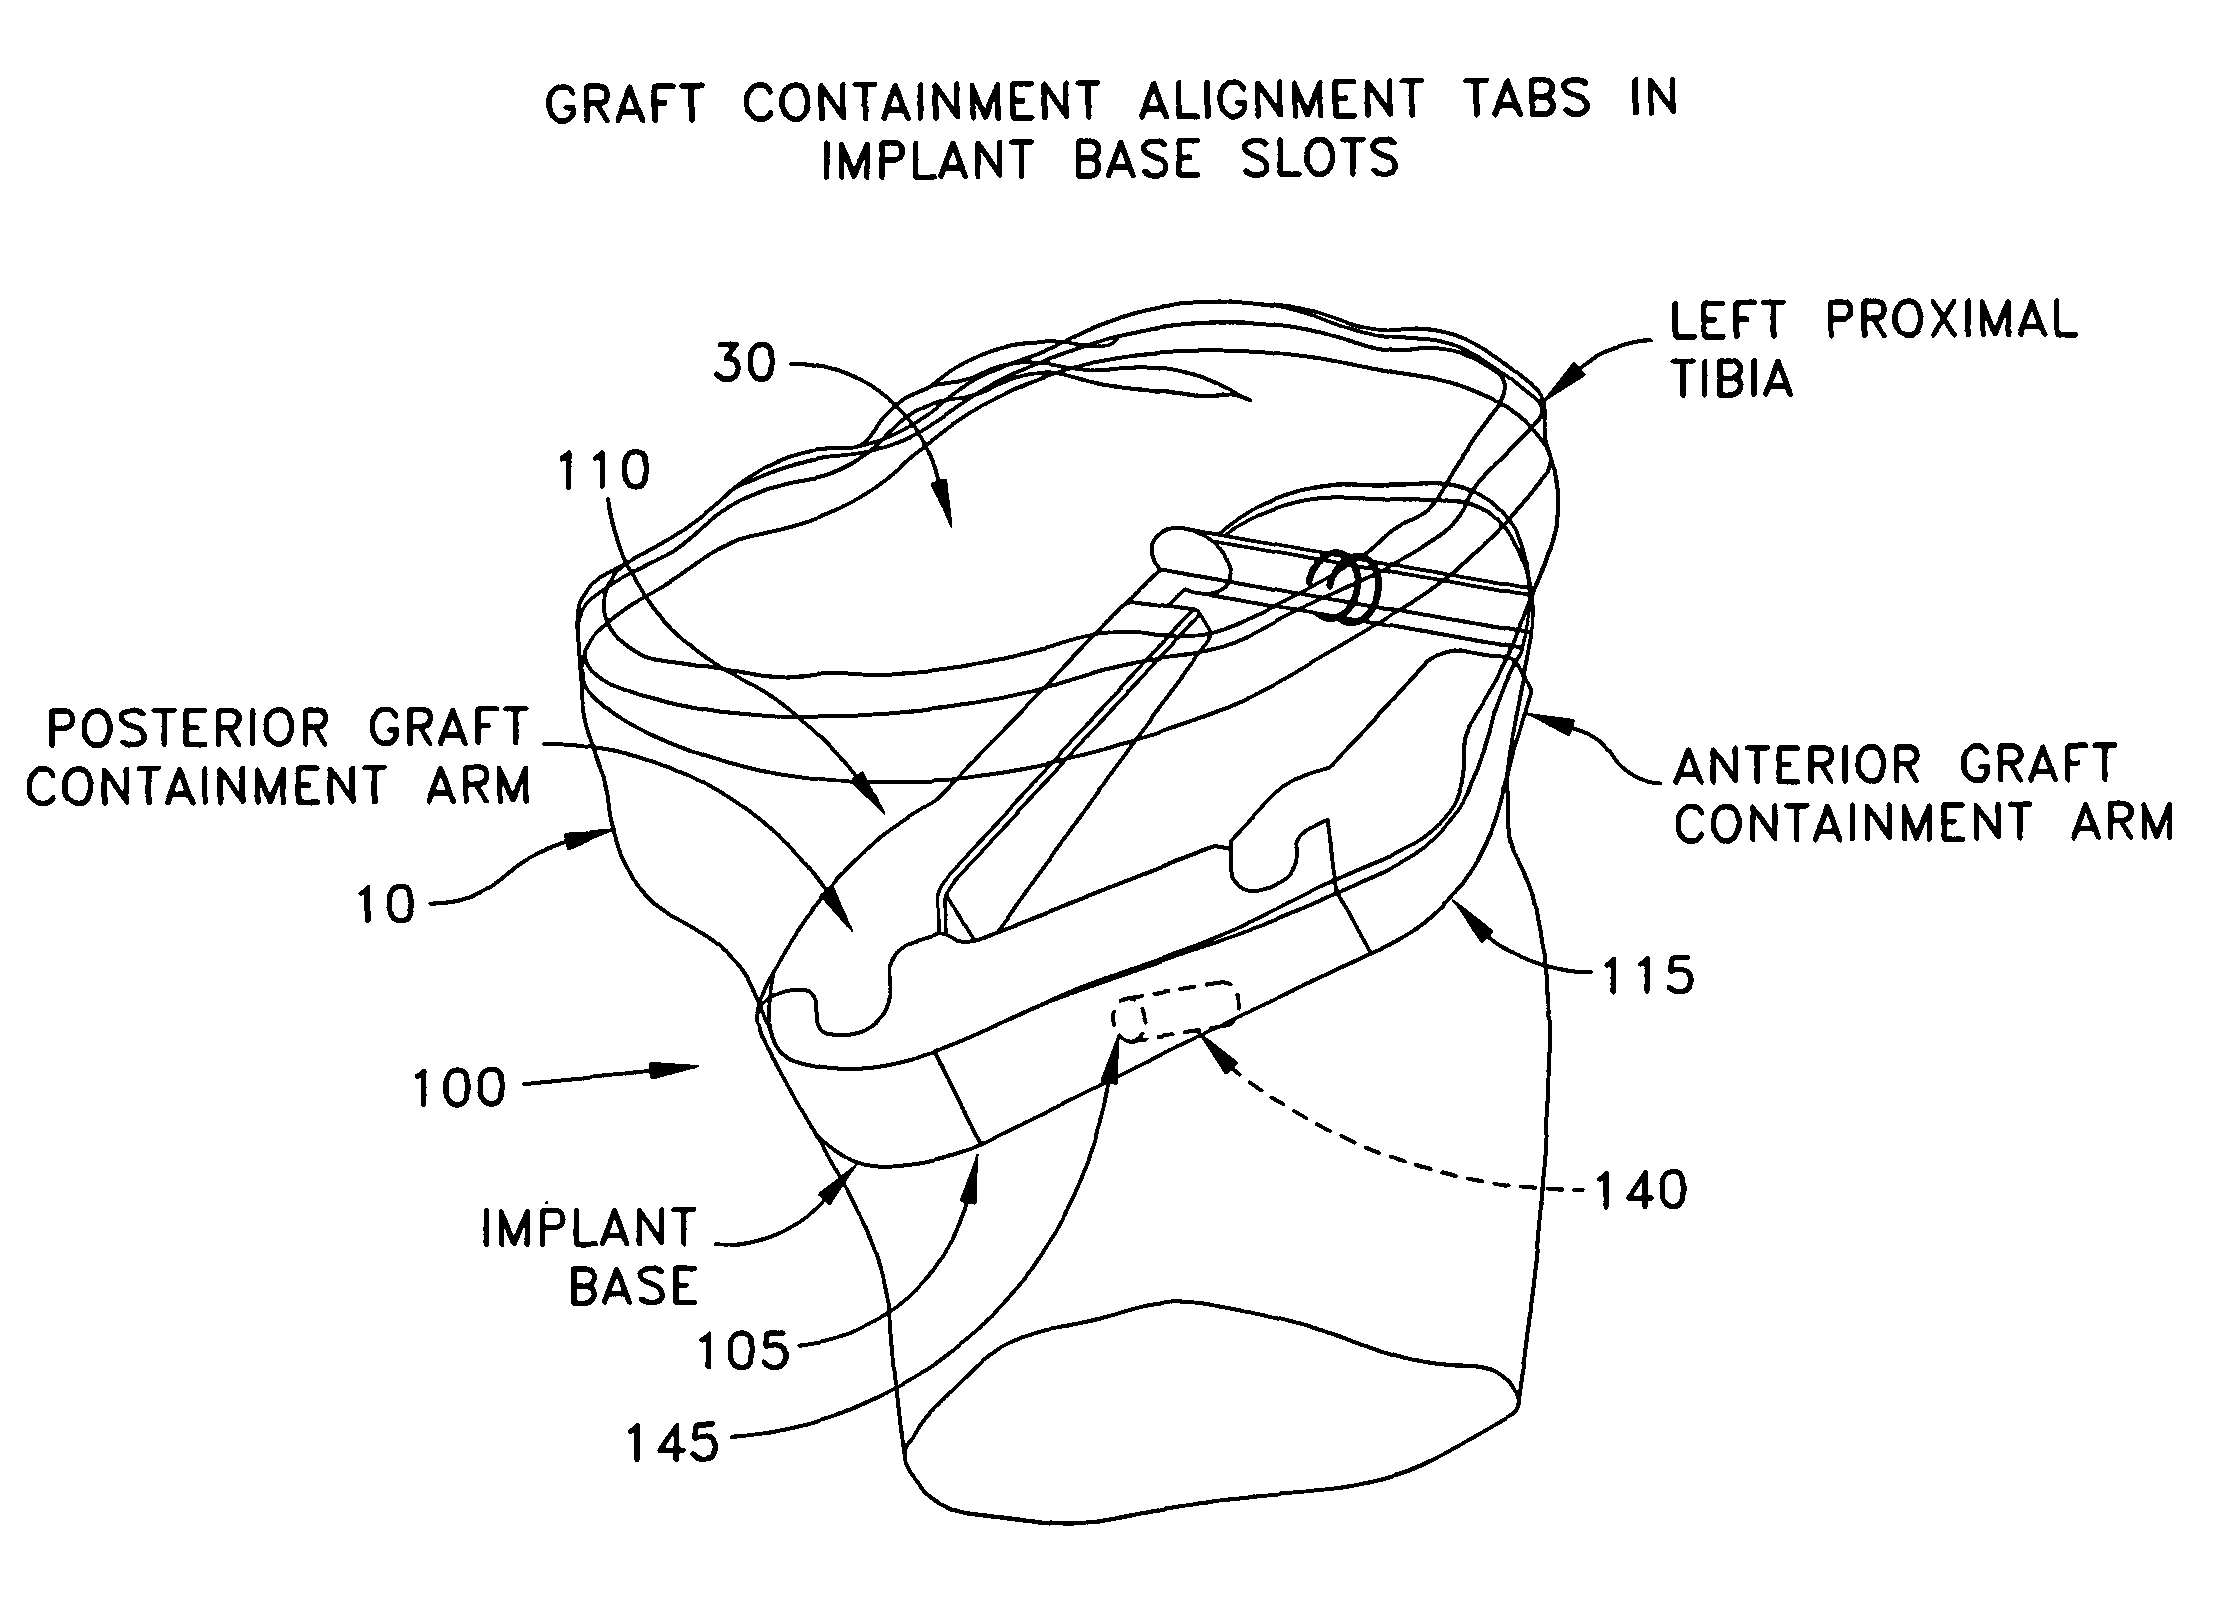 Multi-part implant for open wedge knee osteotomies